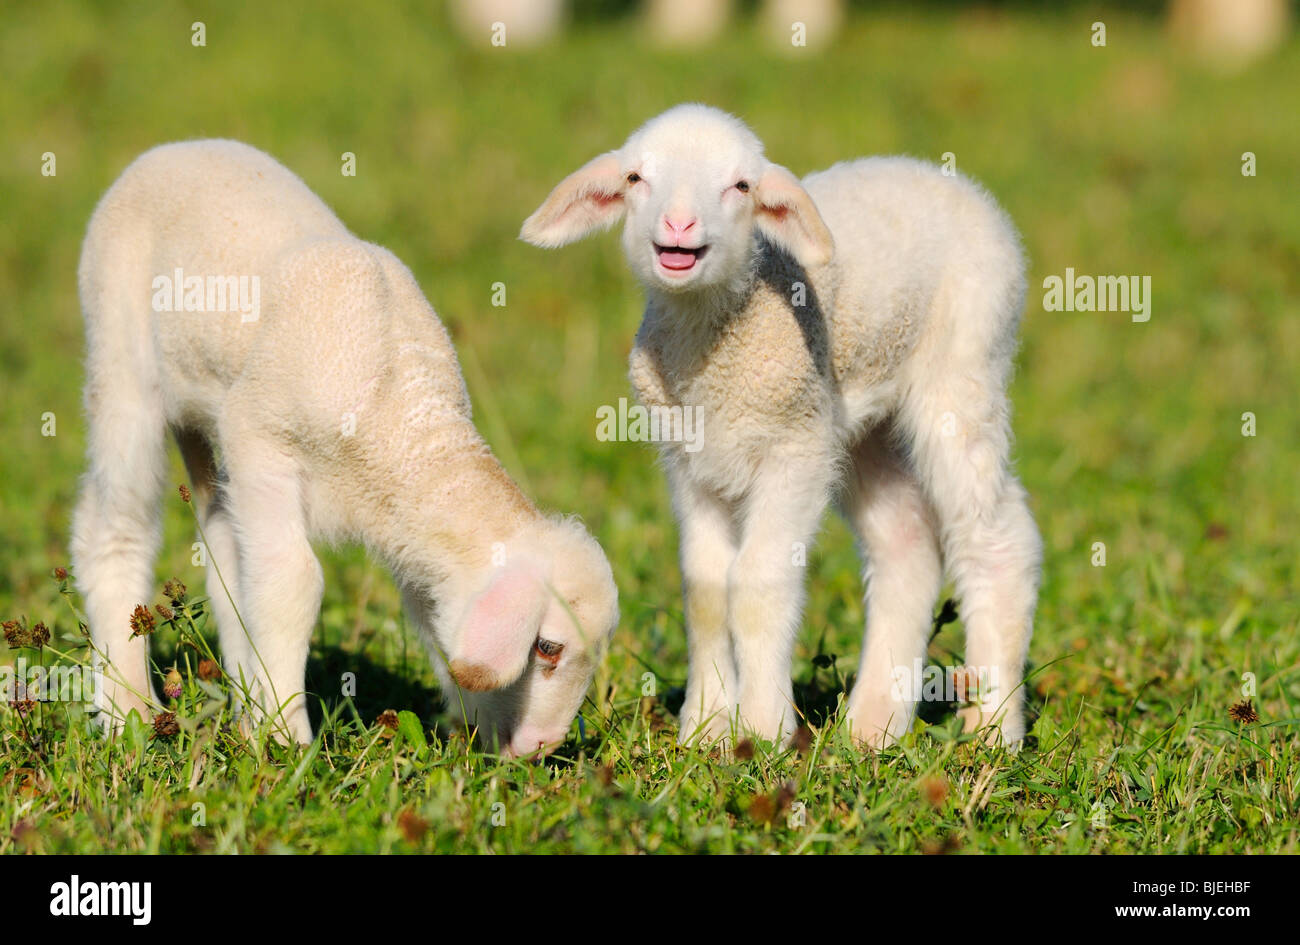 Two sheep (Ovis orientalis aries) on a meadow, Bavaria, Germany Stock Photo